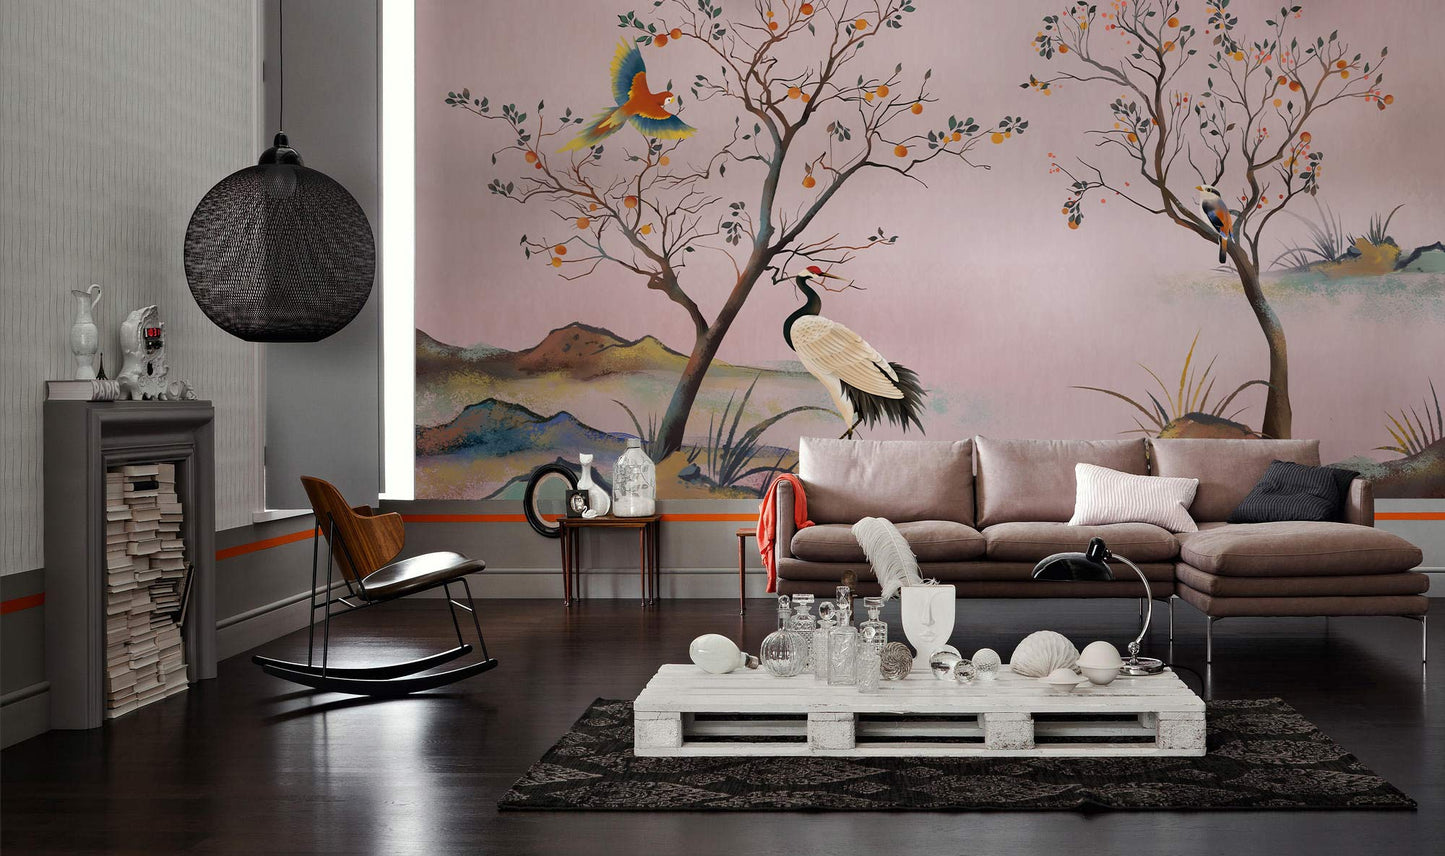 Wallpaper mural with Birds and Trees in Autumn for Use in Decorating the Living Room